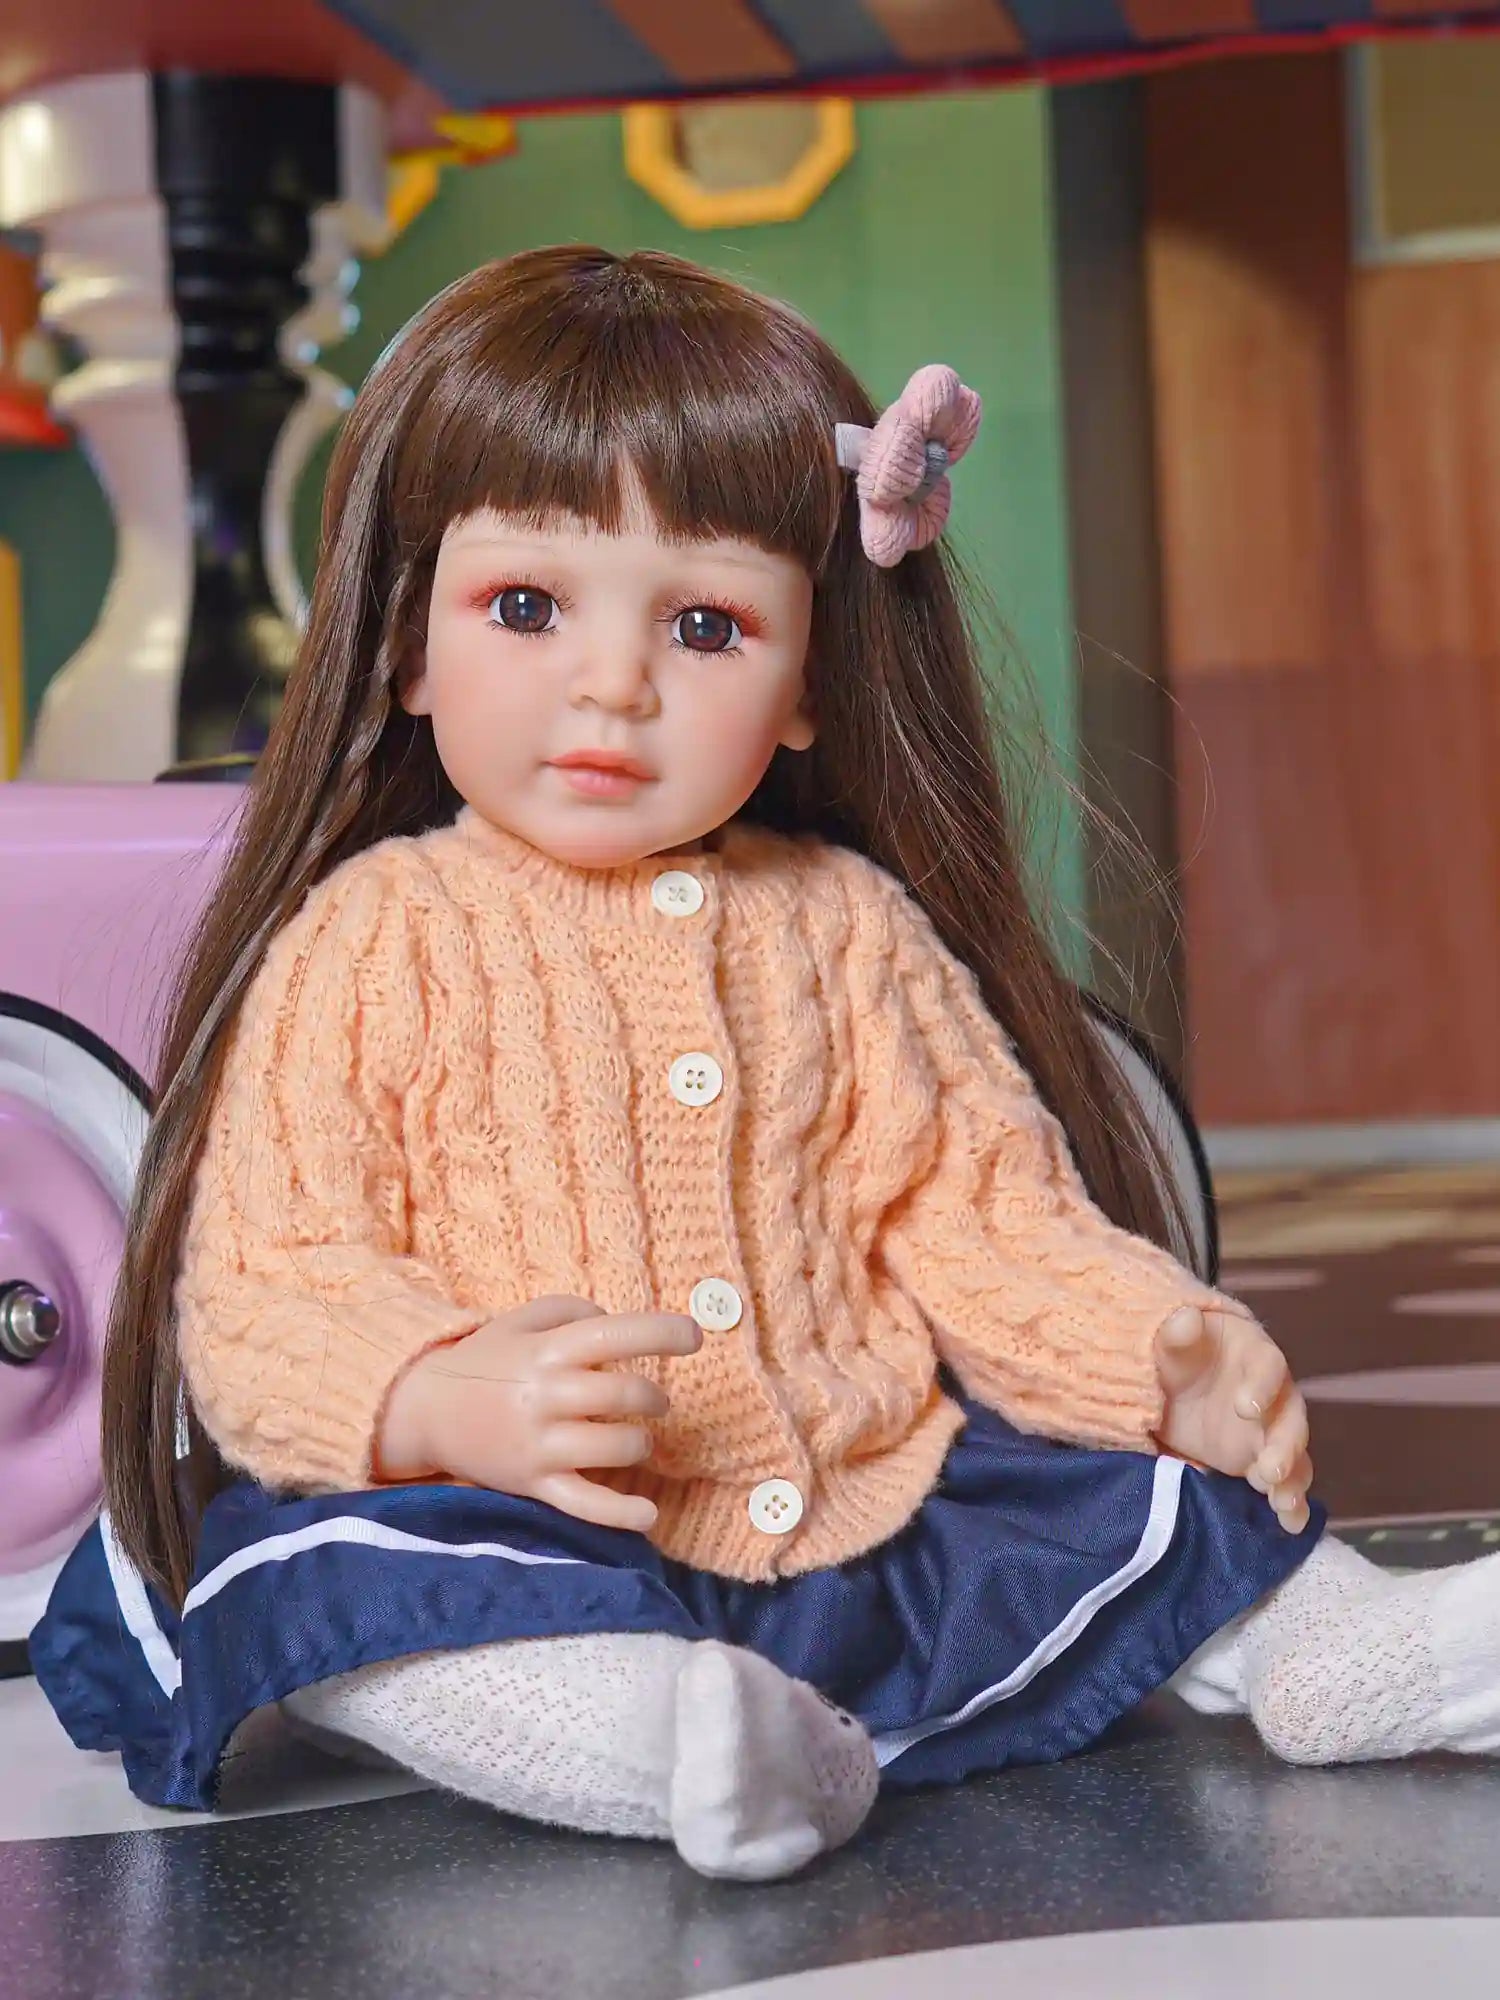 Toddler doll wearing a textured peach sweater and navy blue pants, with white lace tights, seated indoors.